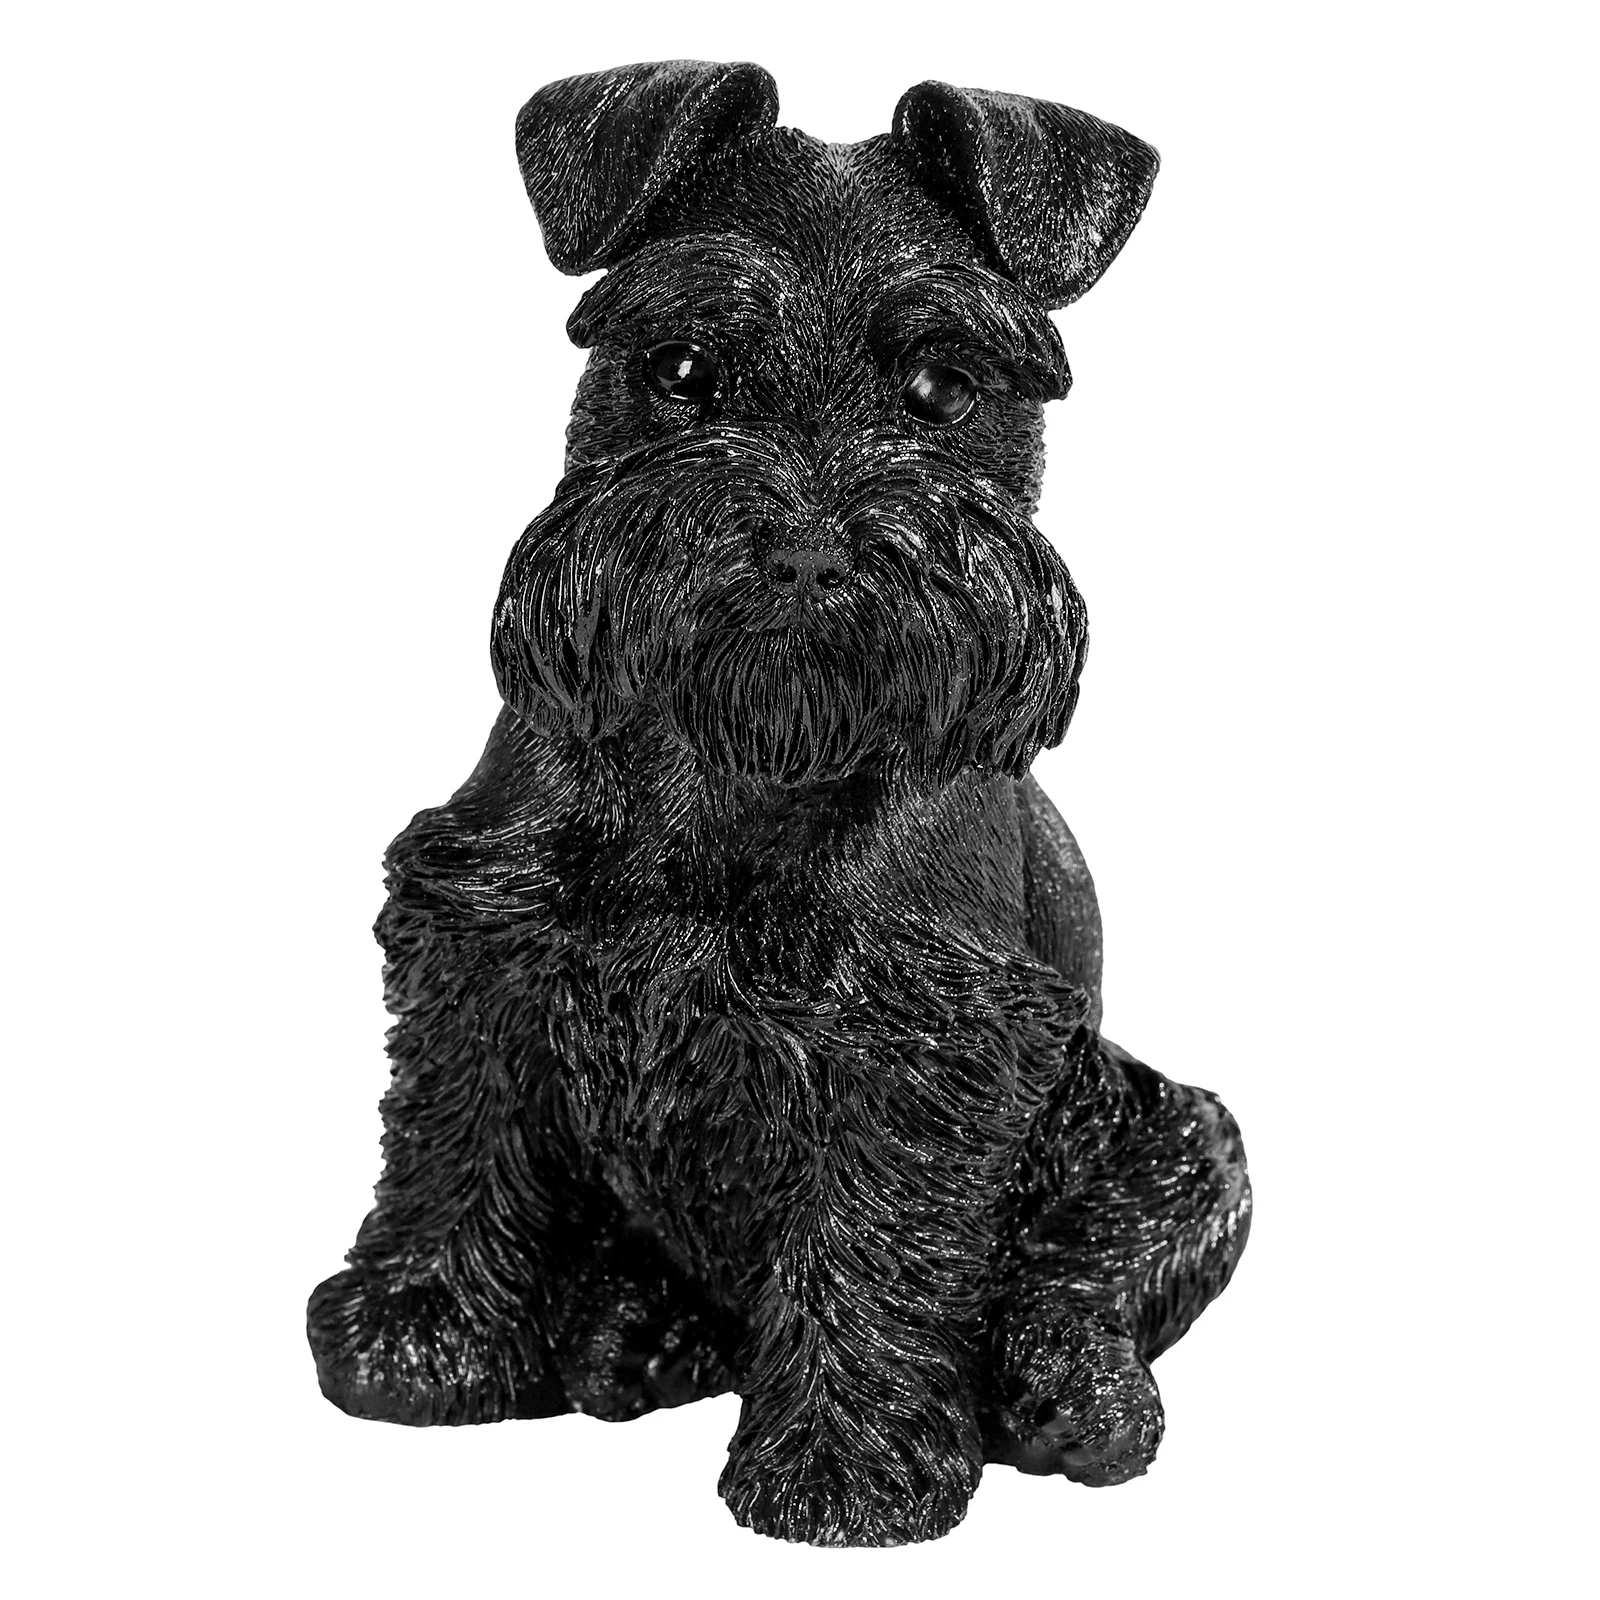 Lovely Mini Schnauzer Puppy Stone Statue Carved Black Obsidian Animal Figurine For Home Decor